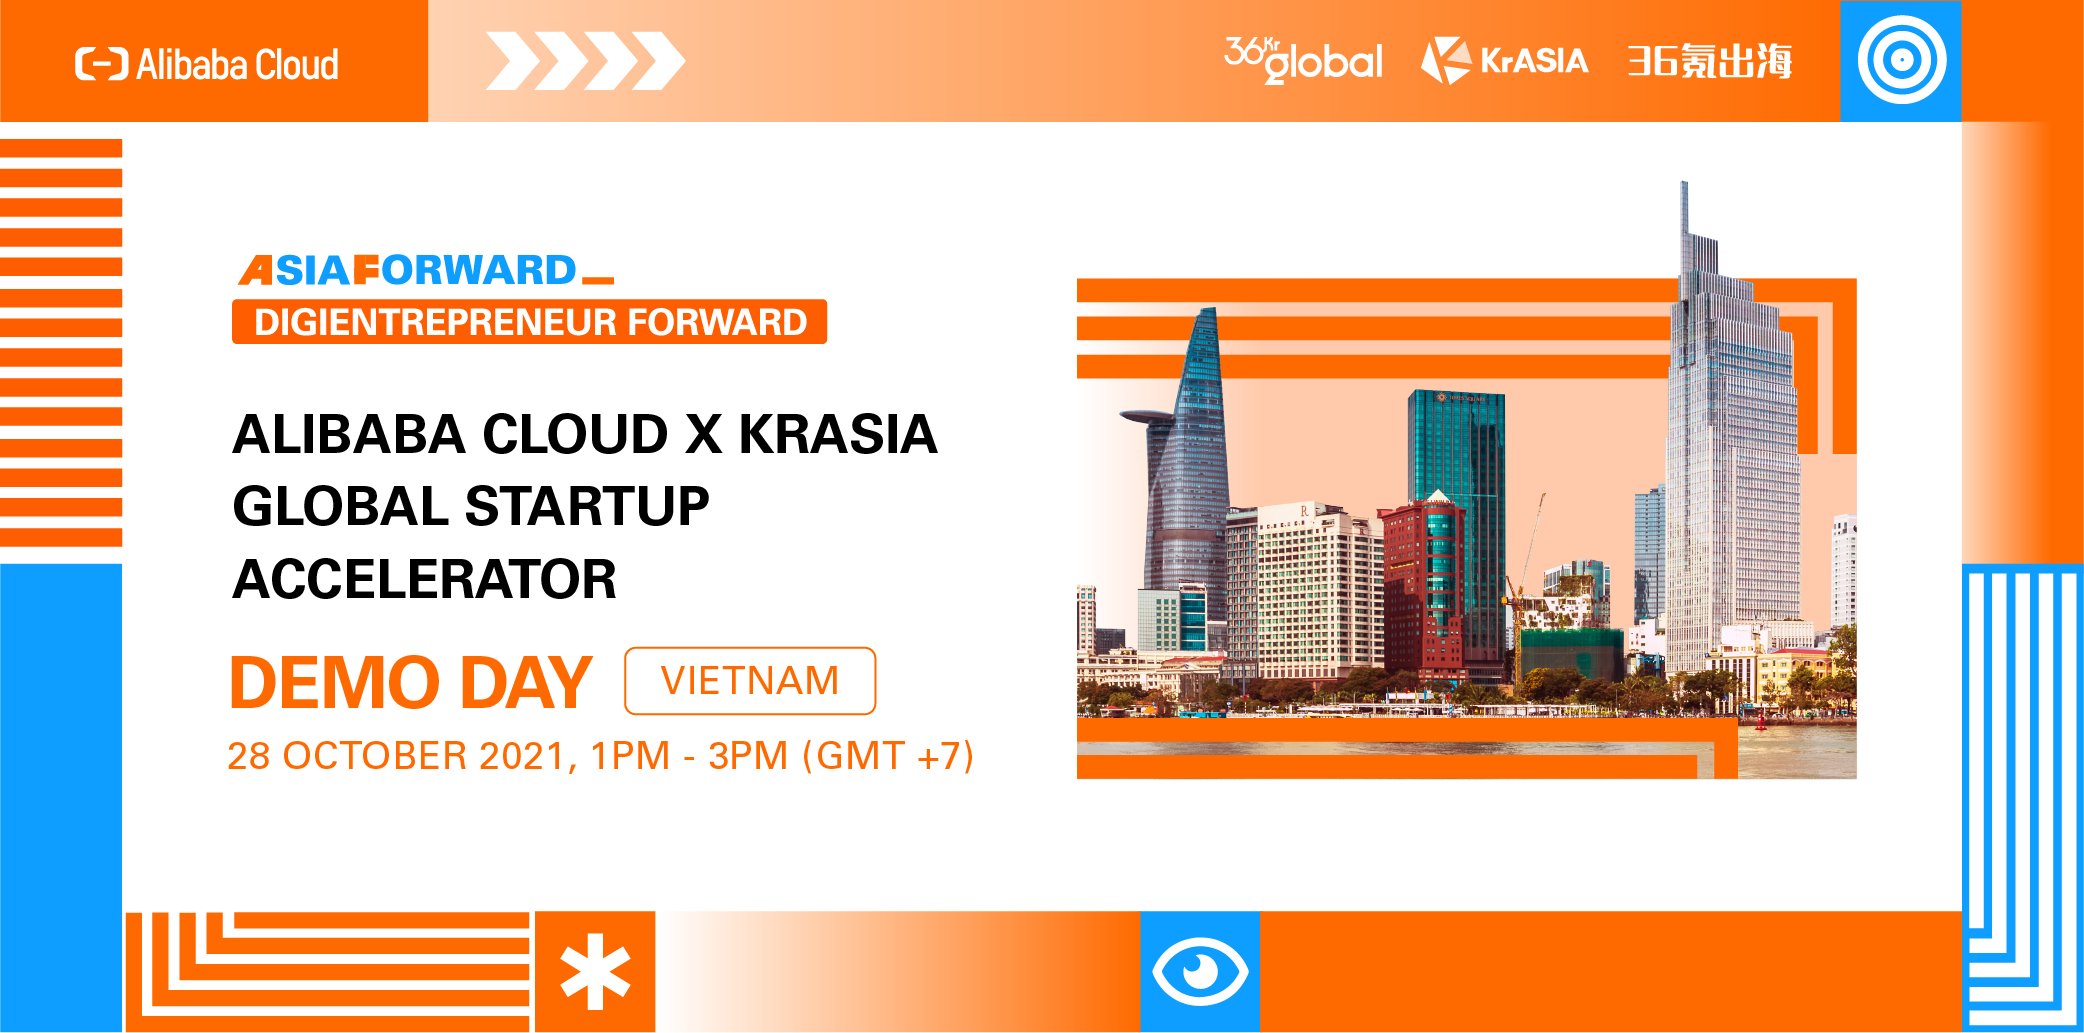 Register for a spot in the Alibaba Cloud x KrASIA Global Startup Accelerator Vietnam Demo Day